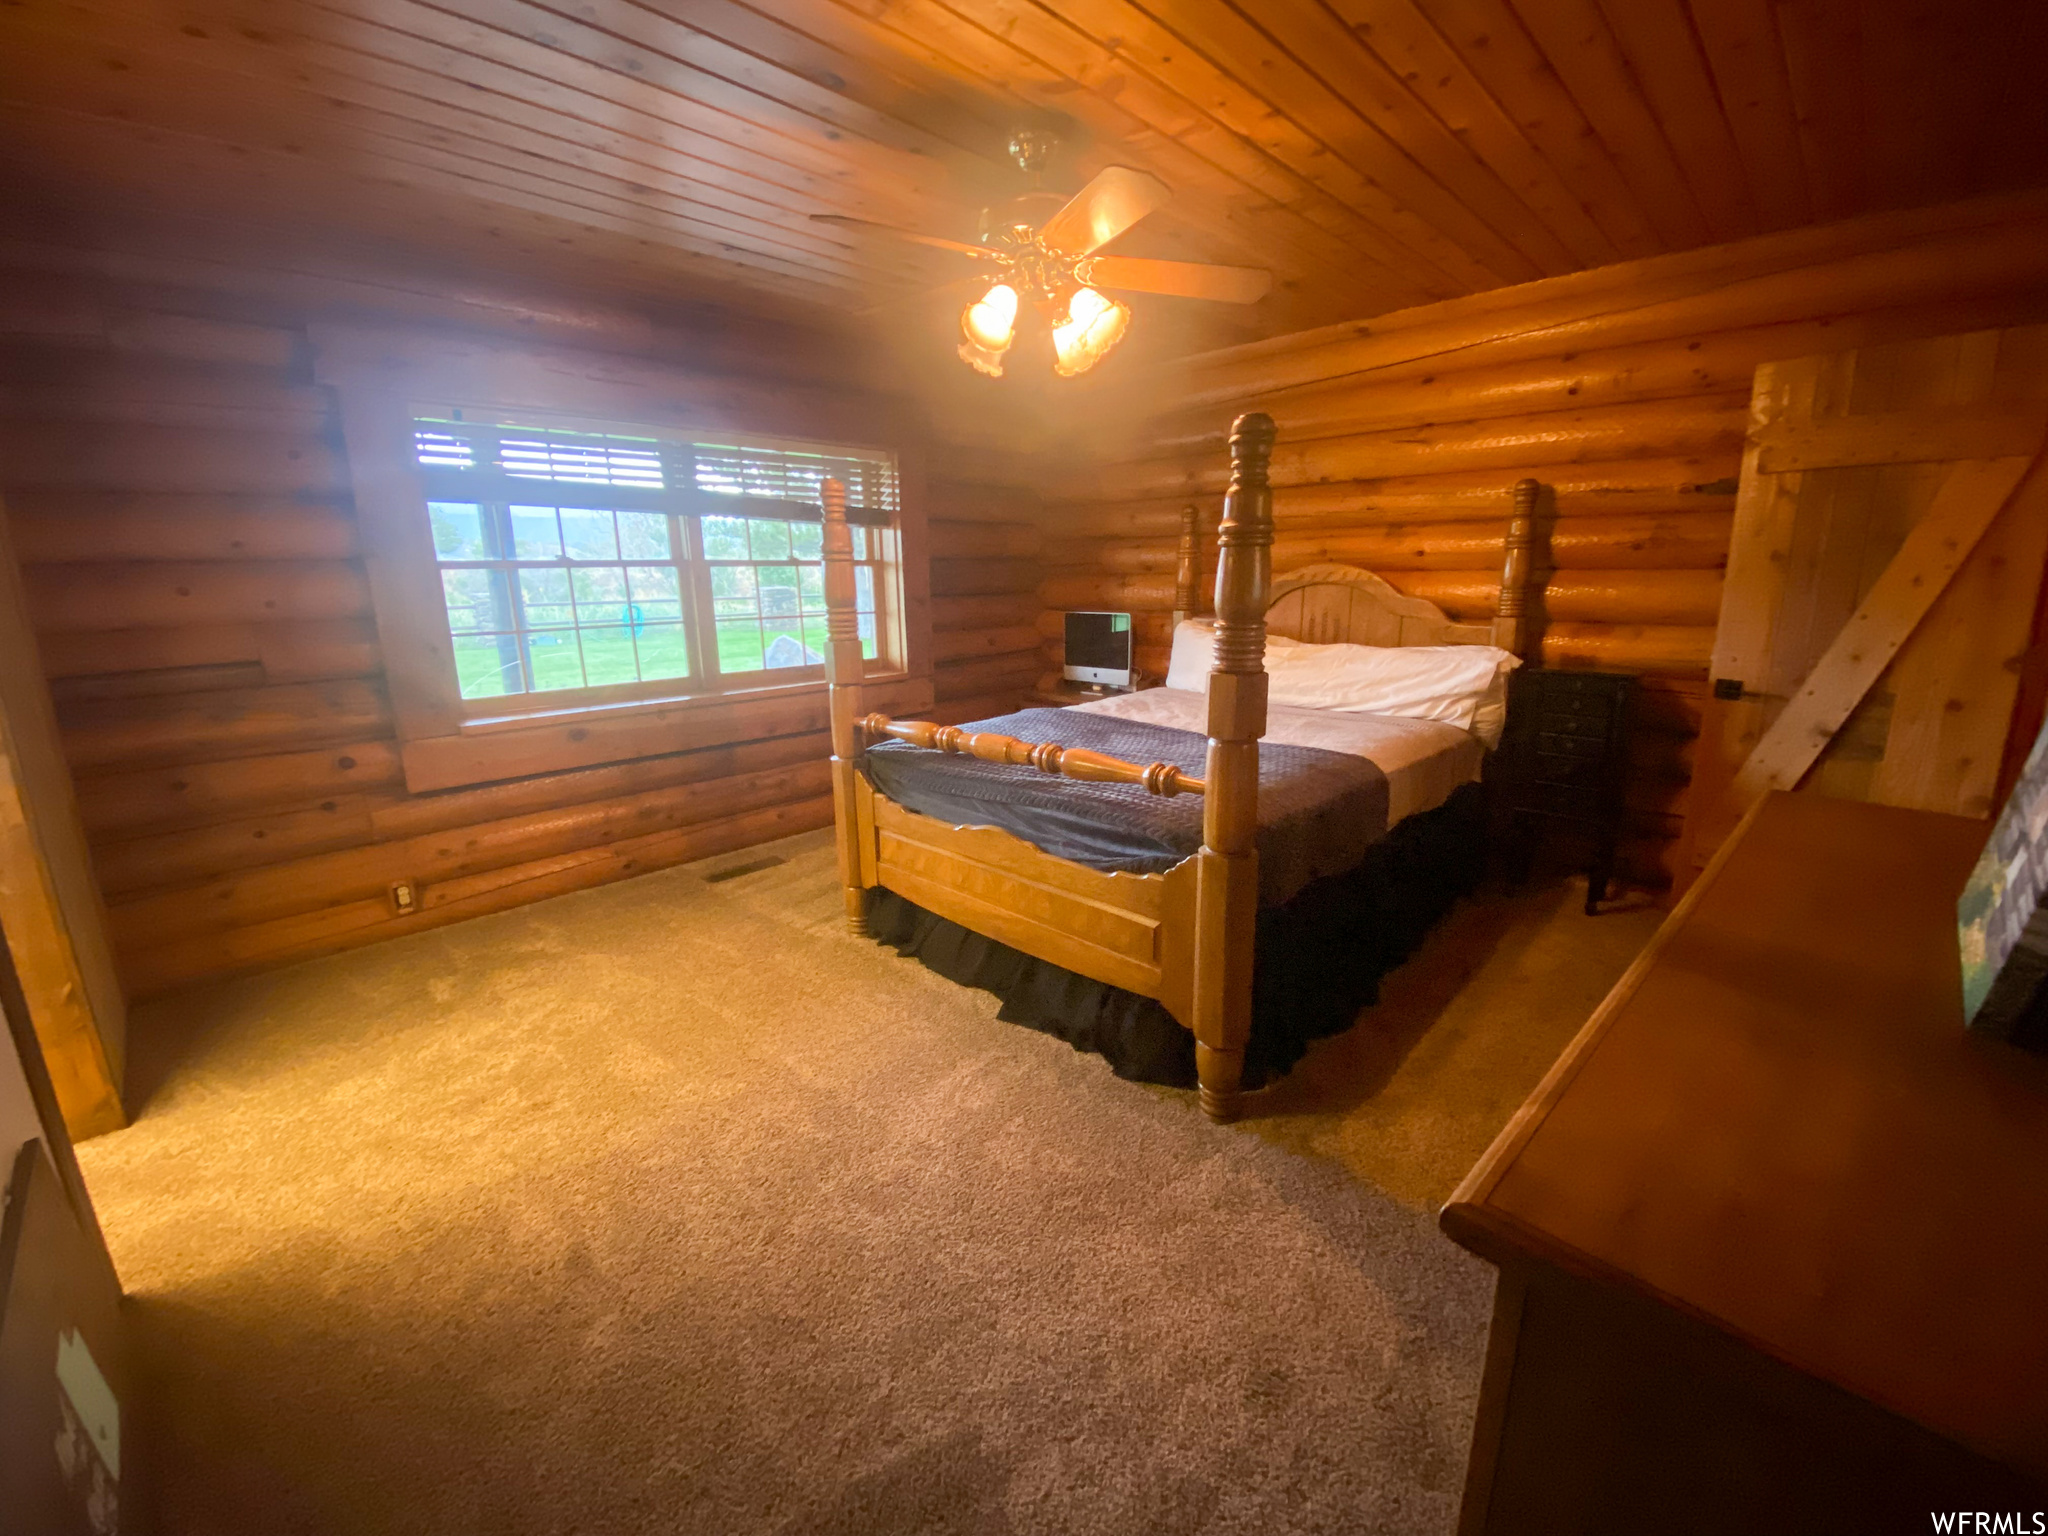 Bedroom with wood ceiling, carpet floors, log walls, and ceiling fan